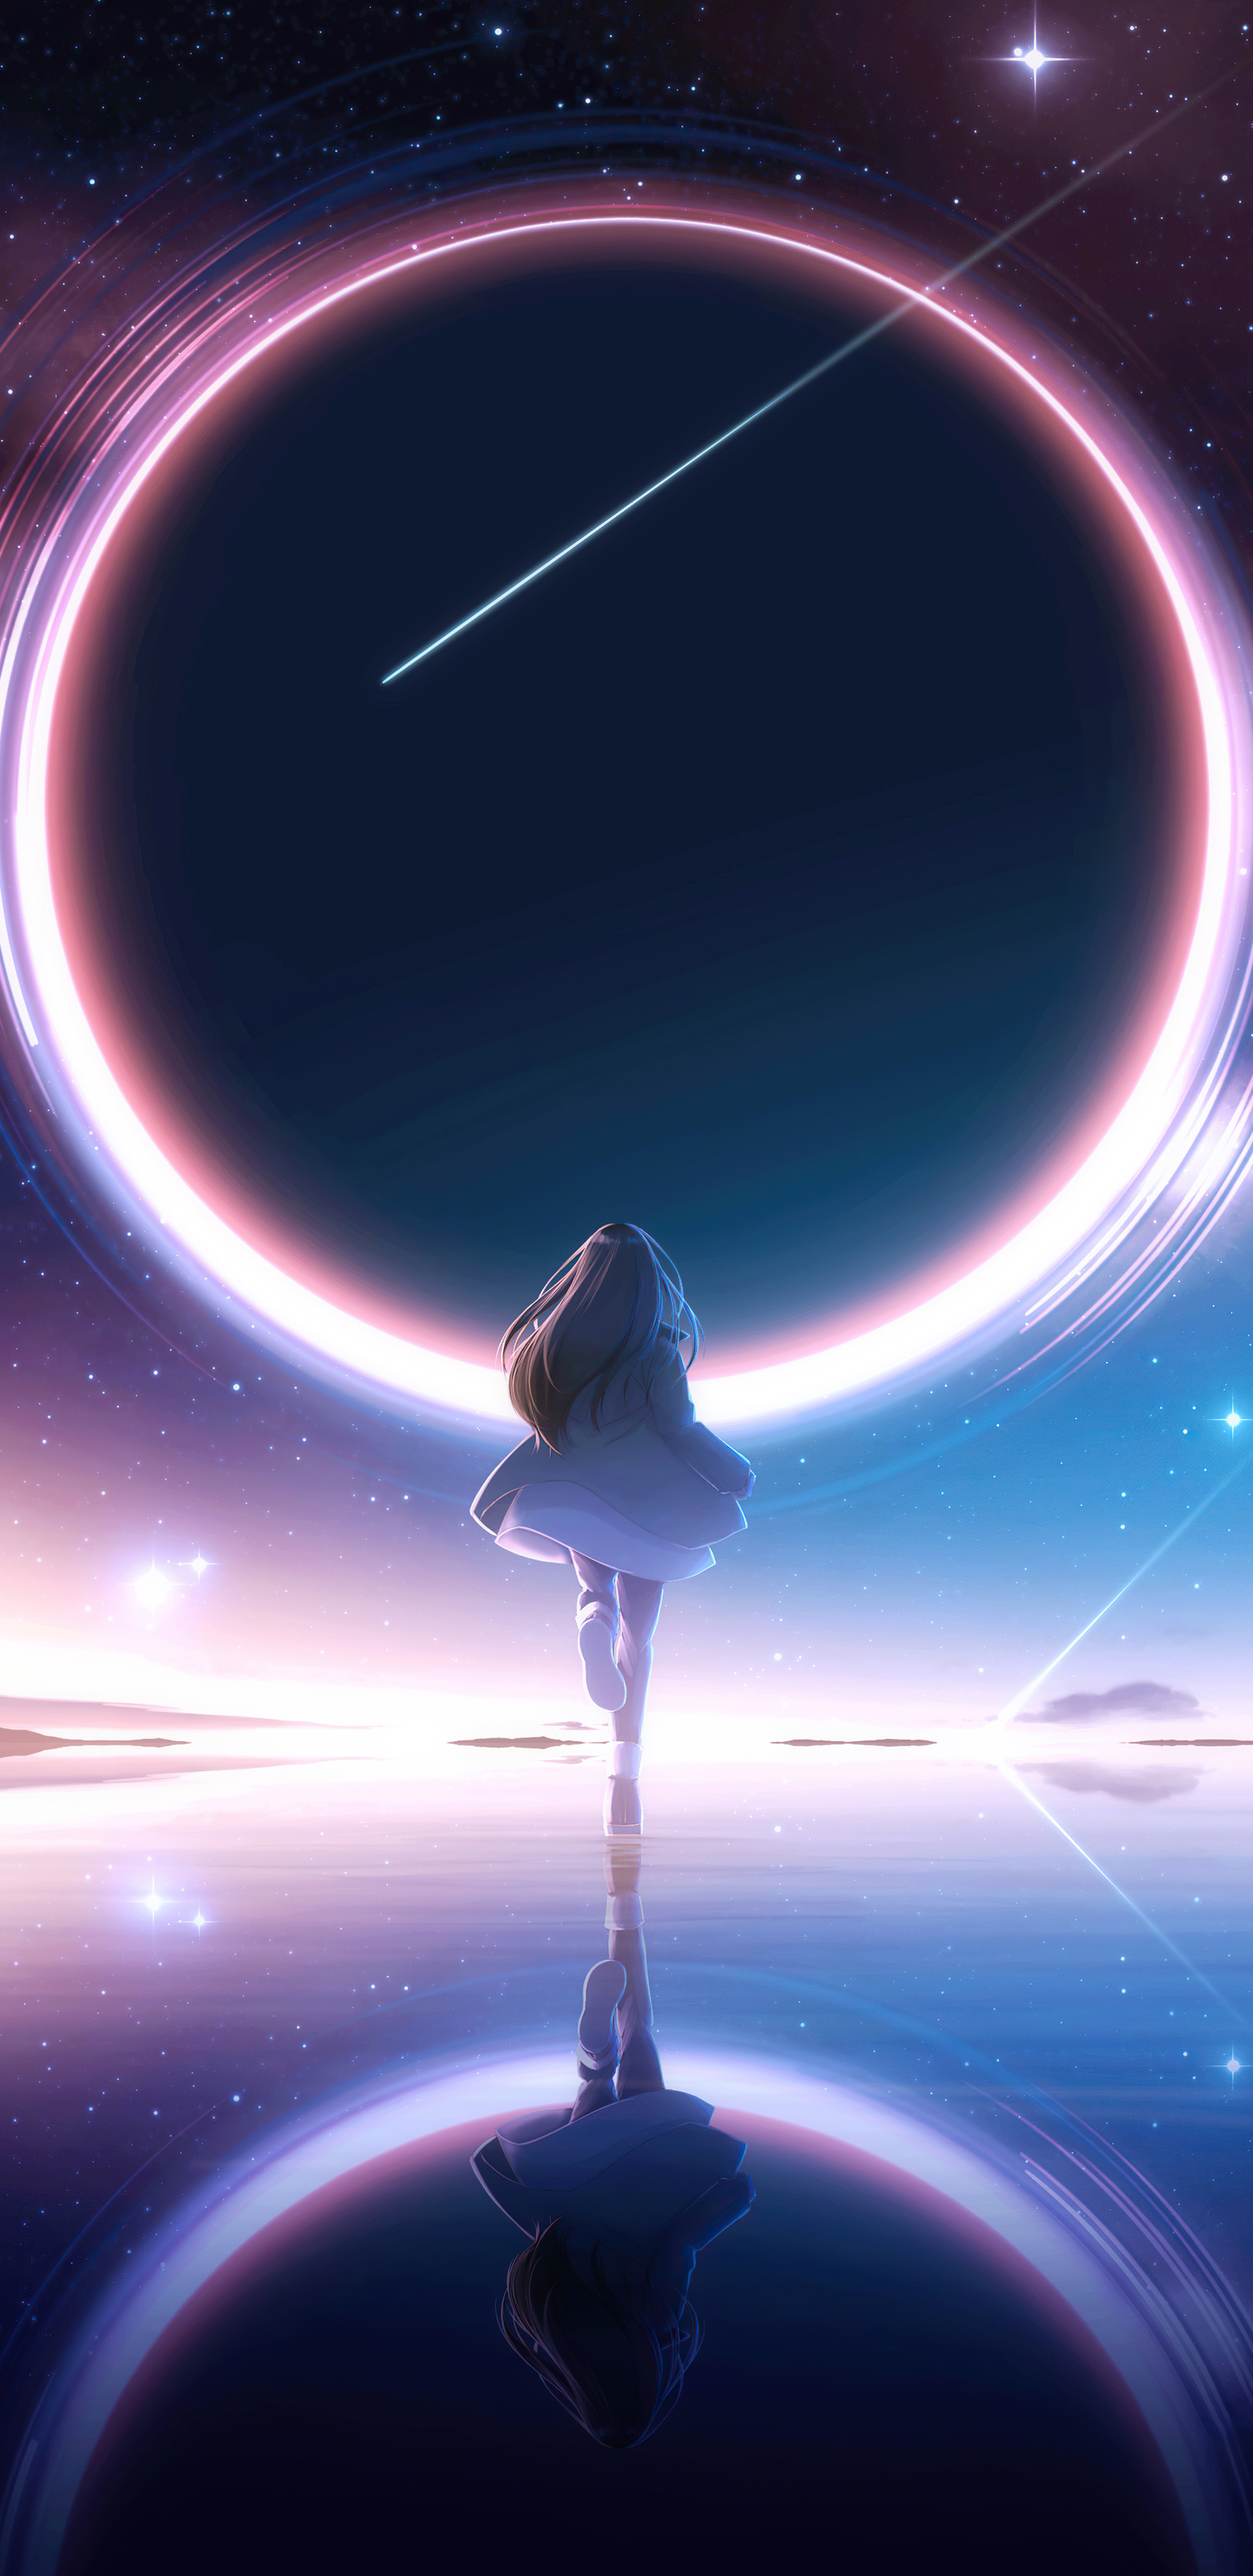 Wallpaper Anime Aesthetic Galaxy Anime Anime Art Anime Style Sleeve  Background  Download Free Image